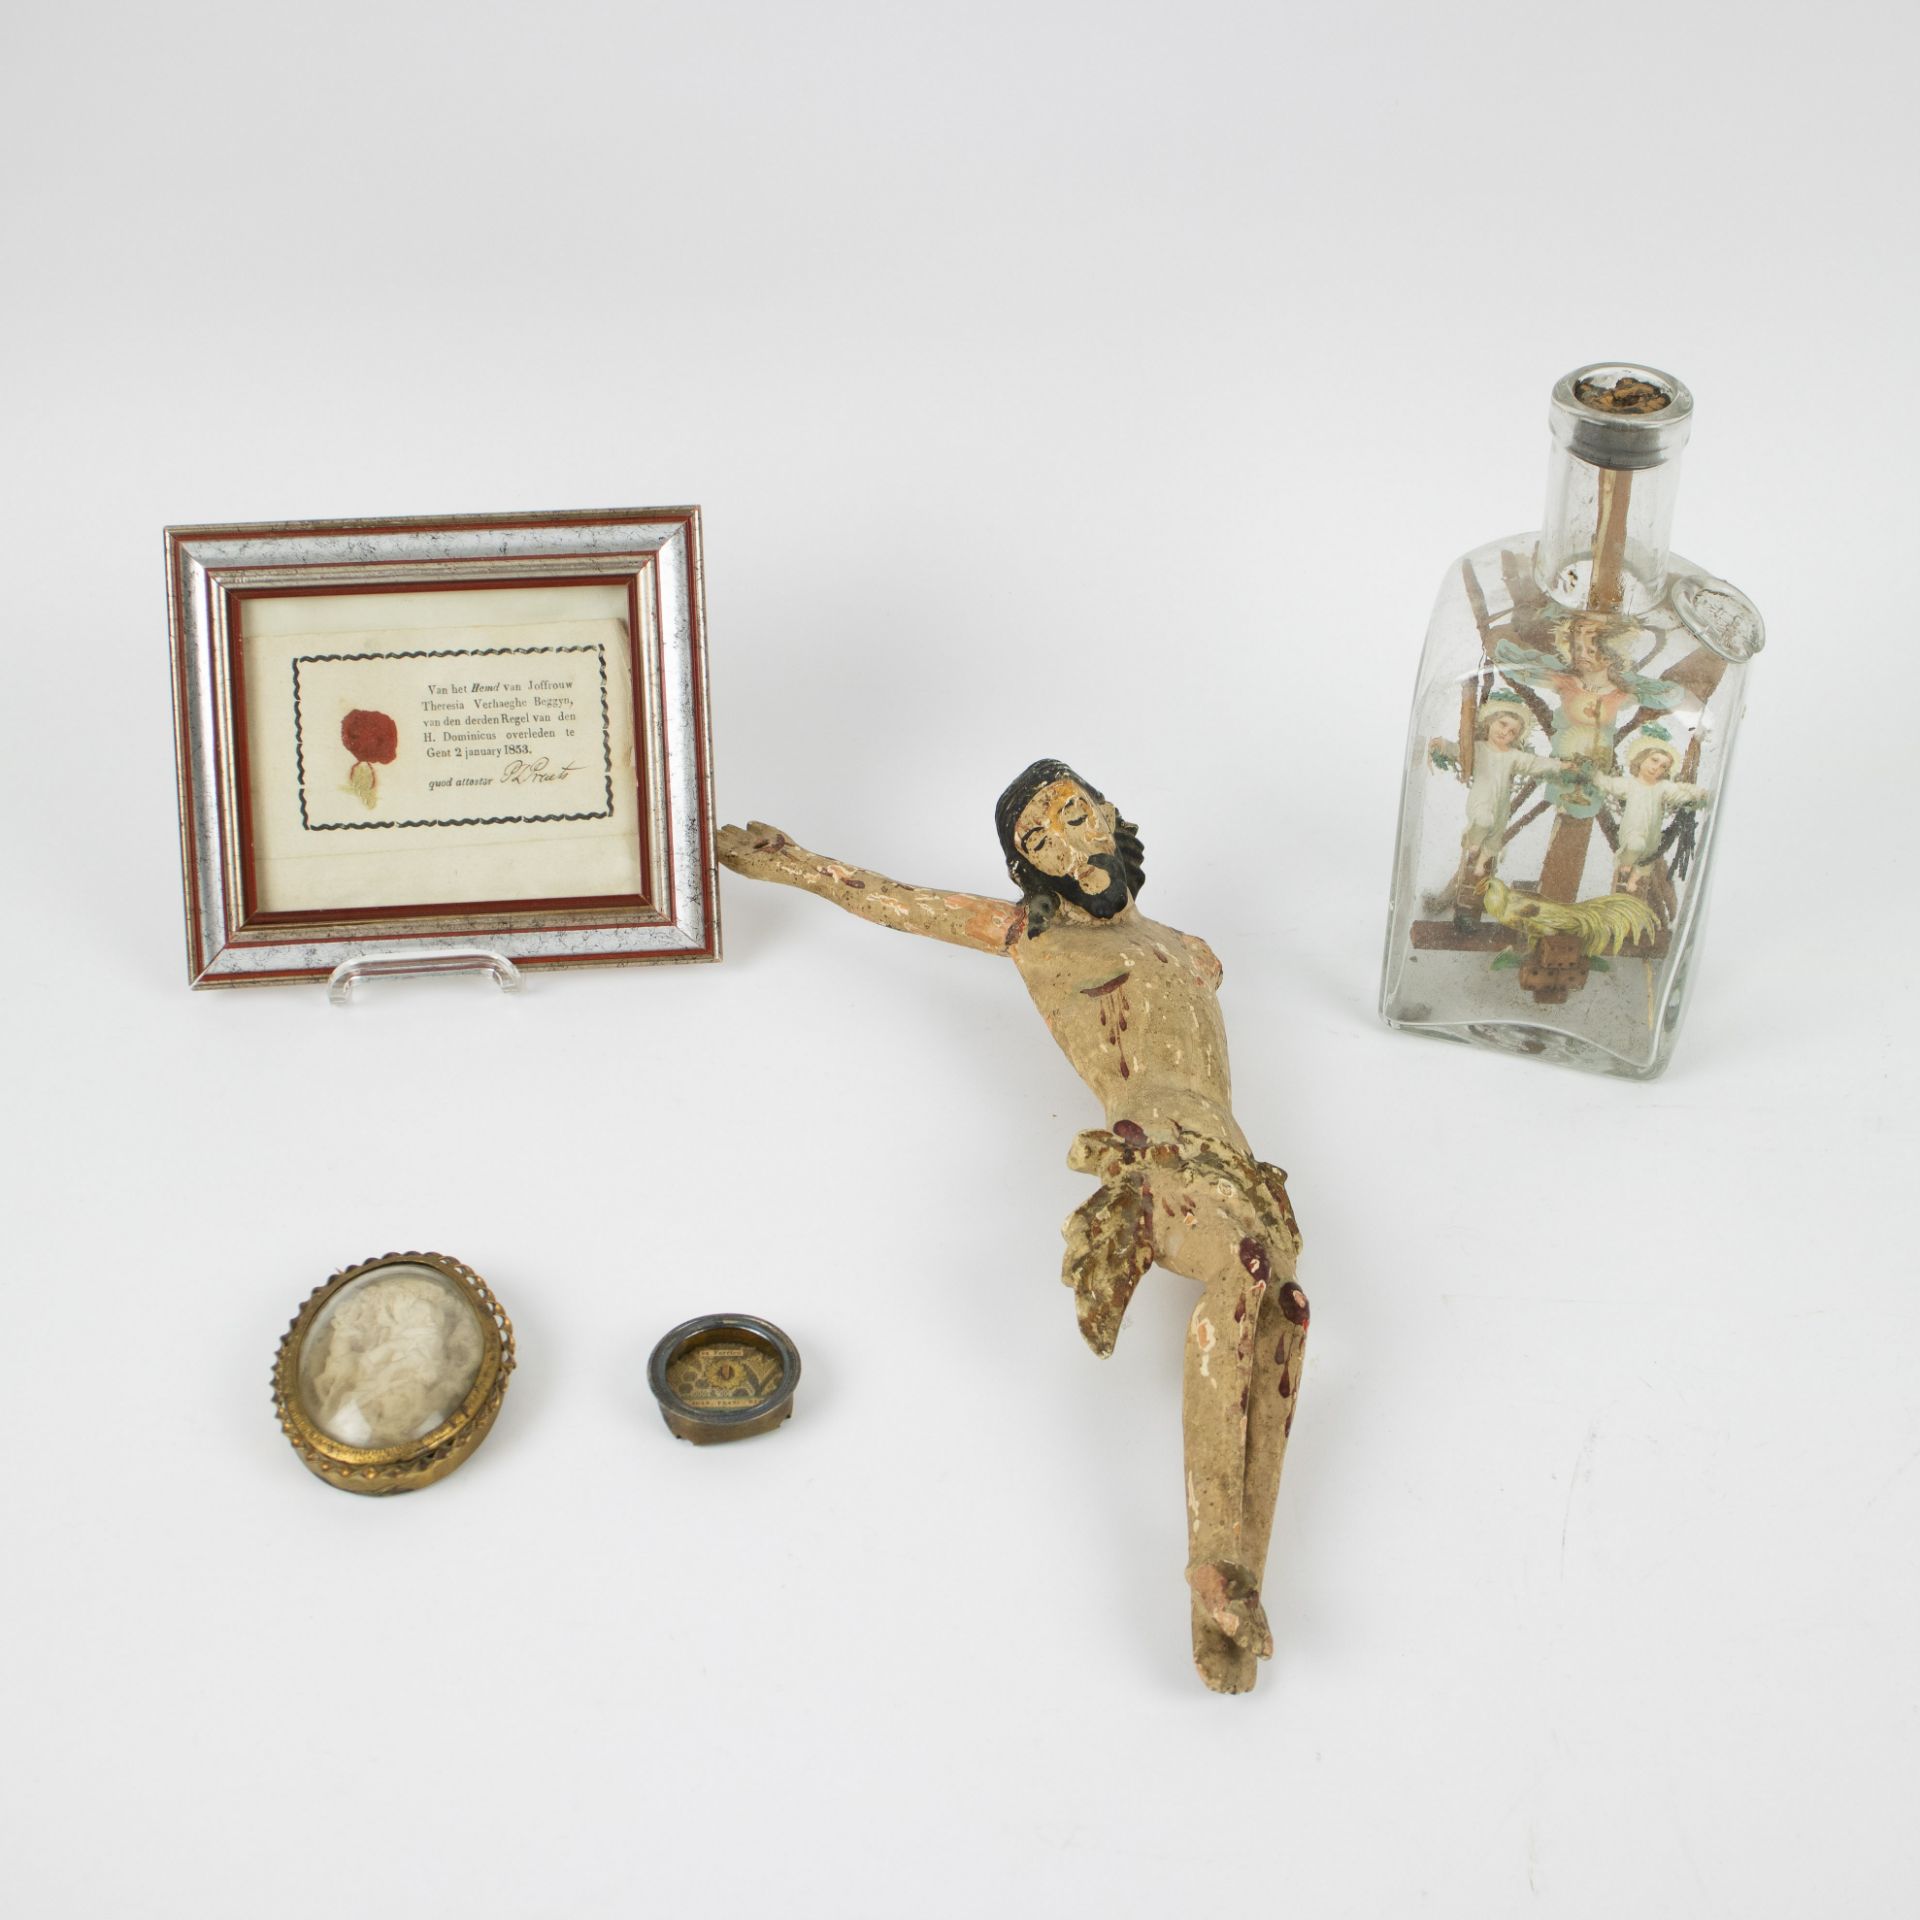 A collection of religious items consisting of a relic, a relic beguine Theressia Verhaeghe, a bottle